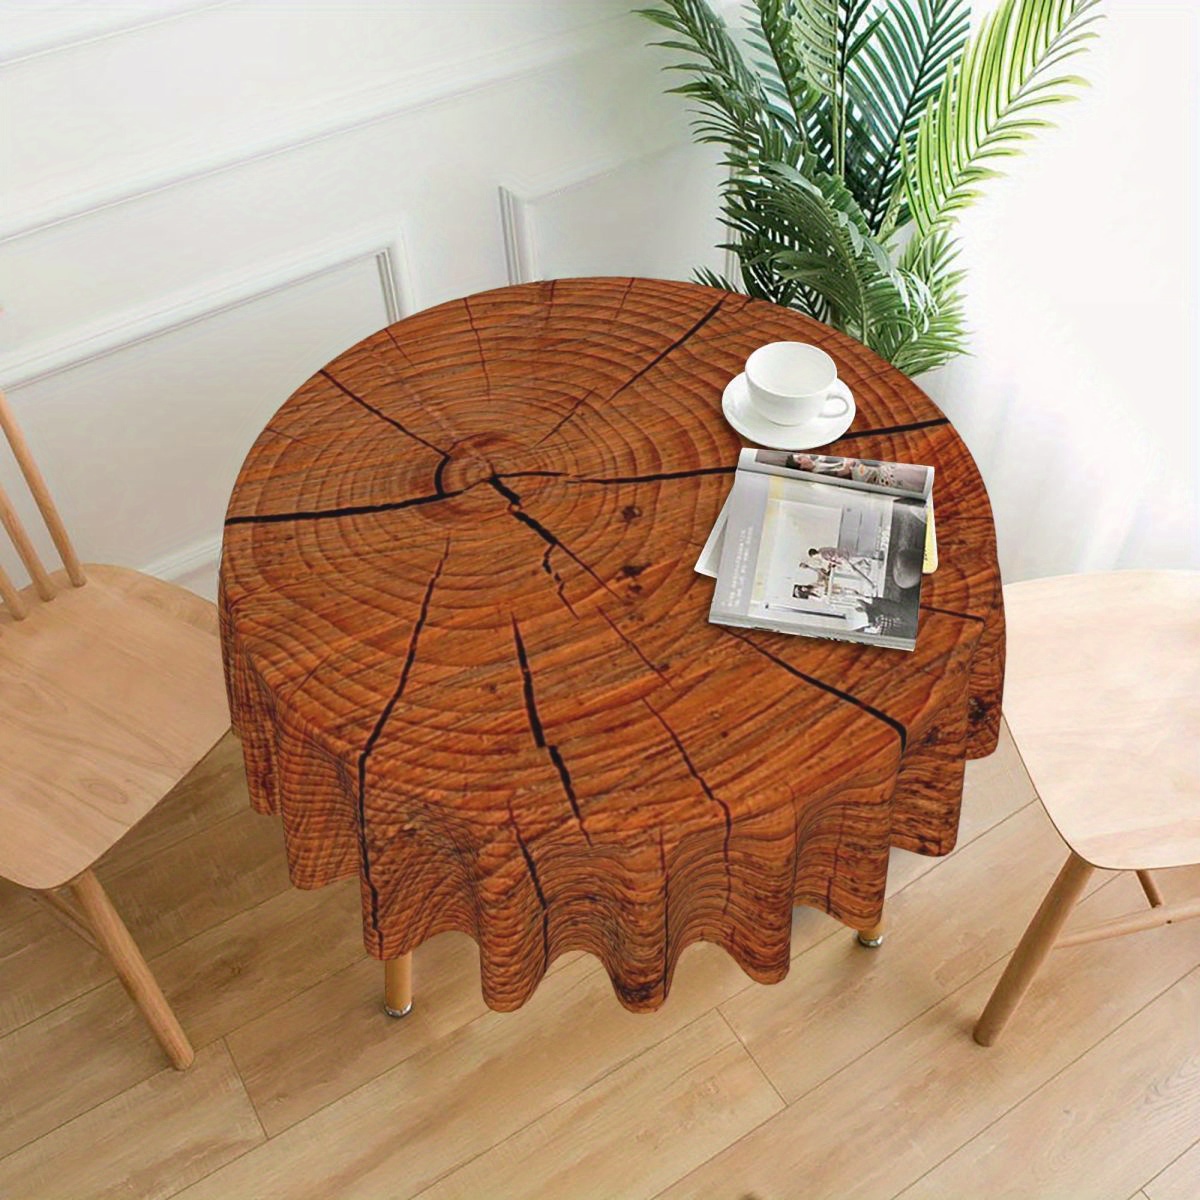 

1pc Rustic Wood Print Round Tablecloth – 100% Polyester, Machine Woven, Stain Resistant, Washable, Fine Microfiber Dining Table Cover For Kitchen And Restaurant Decor, Festive Party Decoration